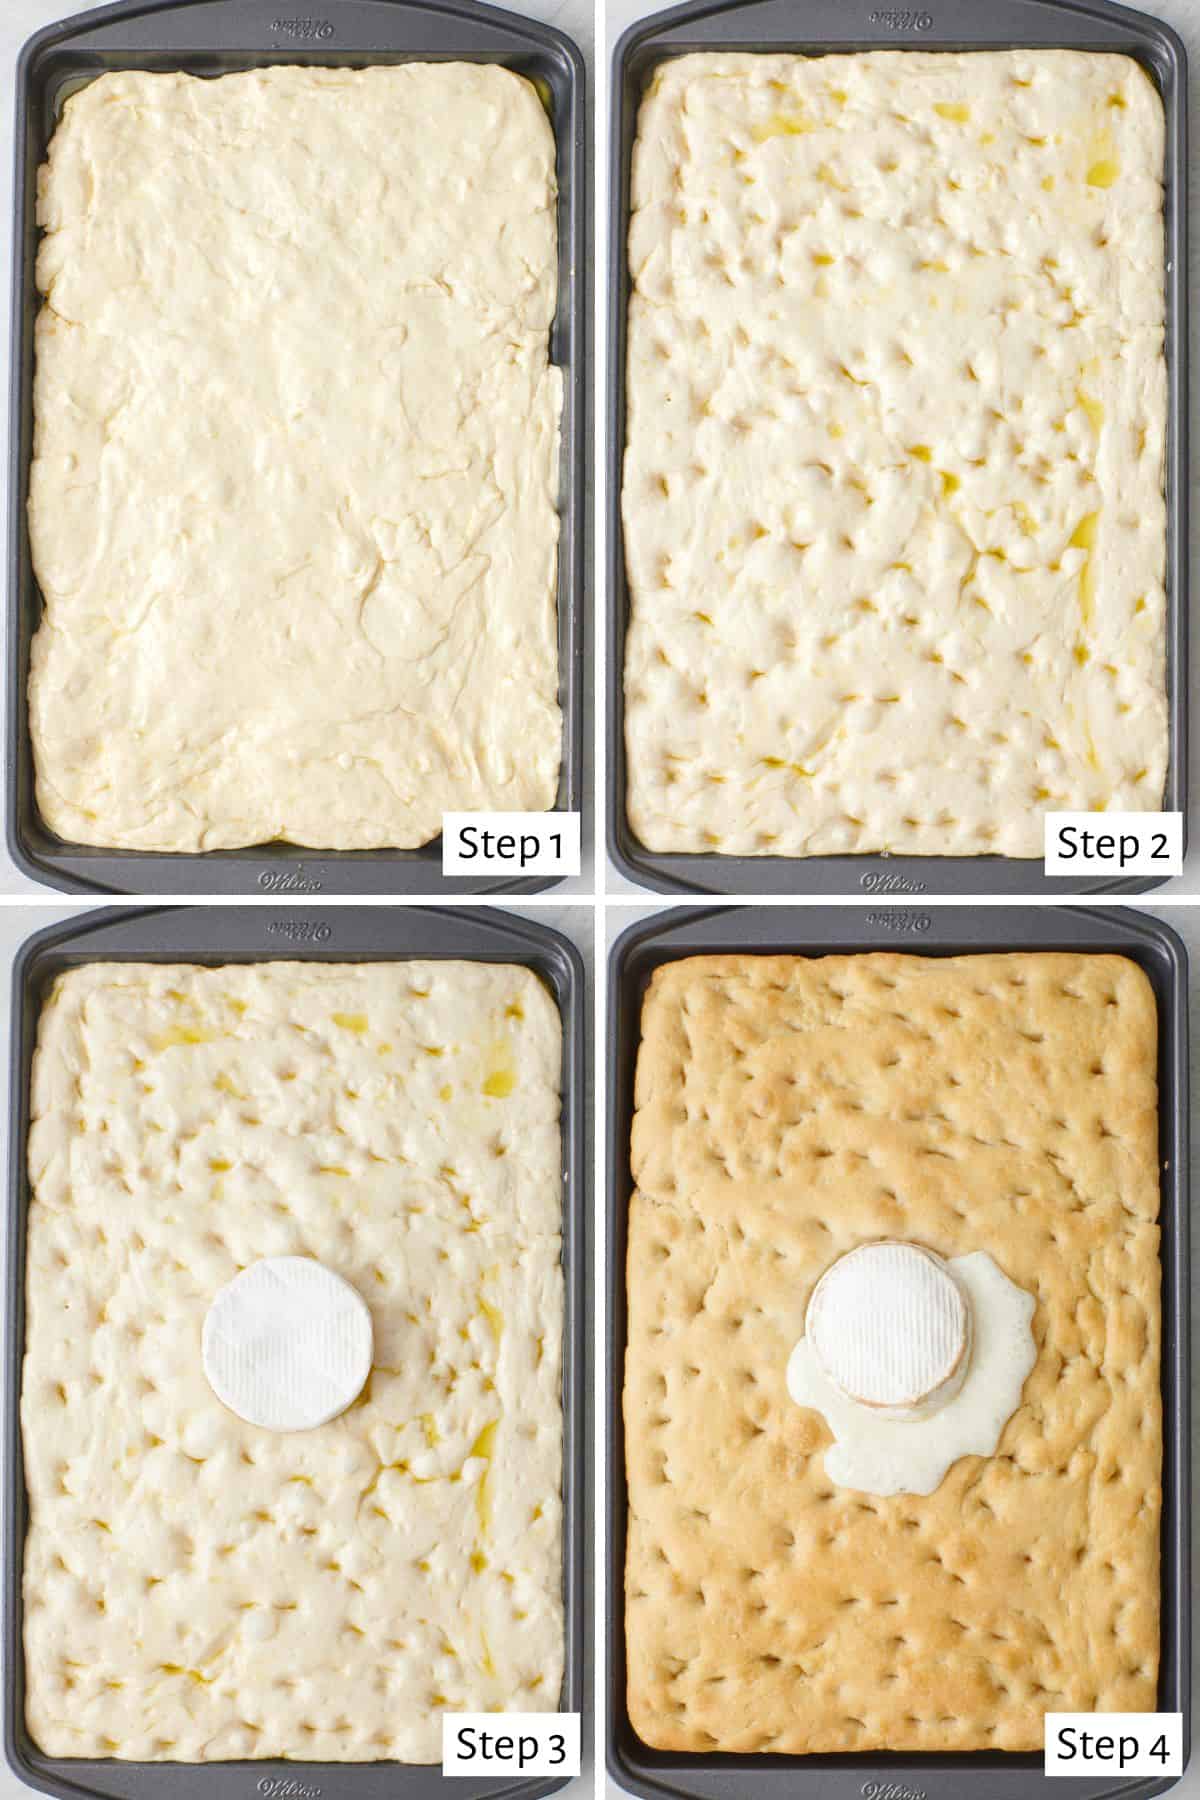 4 image collage of recipe on a sheet pan: 1- focaccia dough pressed into pan, 2- after adding oil and pressing fingers into dough, 3- brie added to the center of the dough before baking, 4- after baking with brie melted.